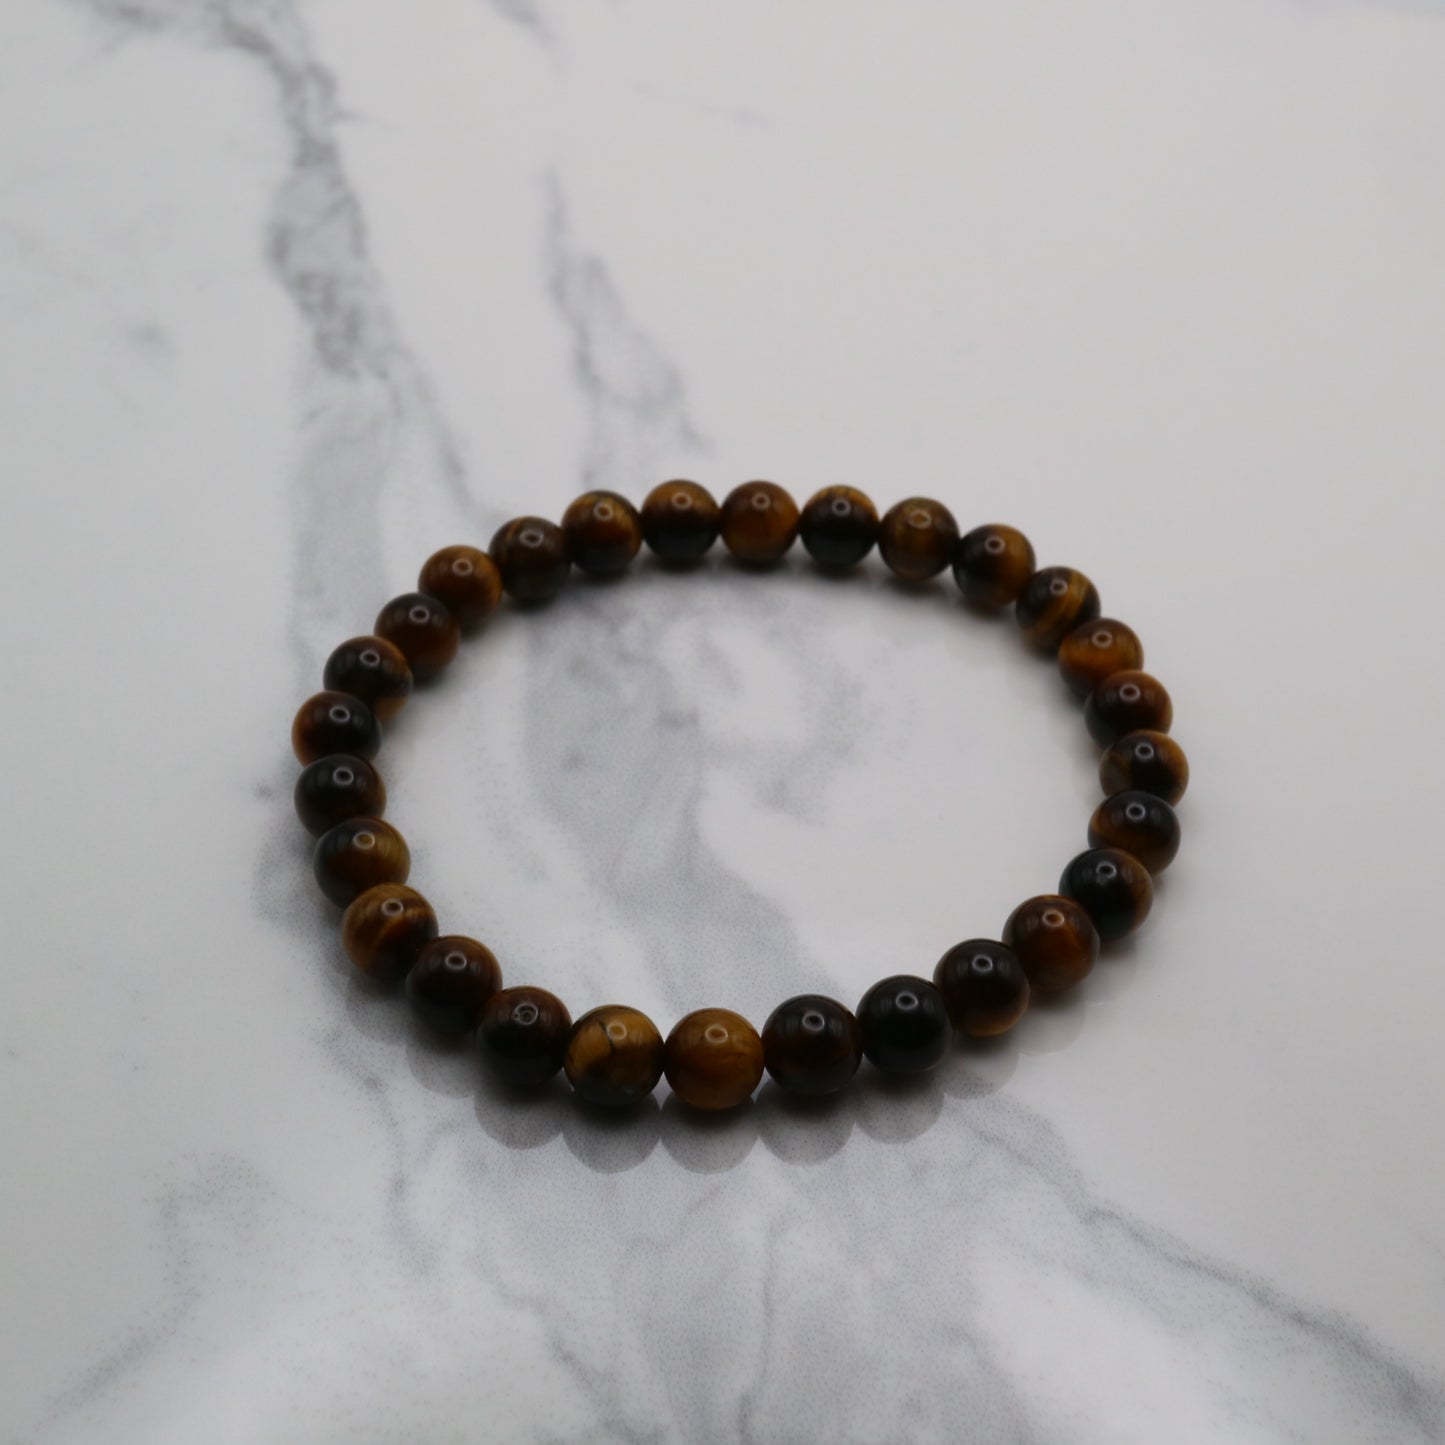 Tiger Eye crystal bead bracelet with 6mm size beads